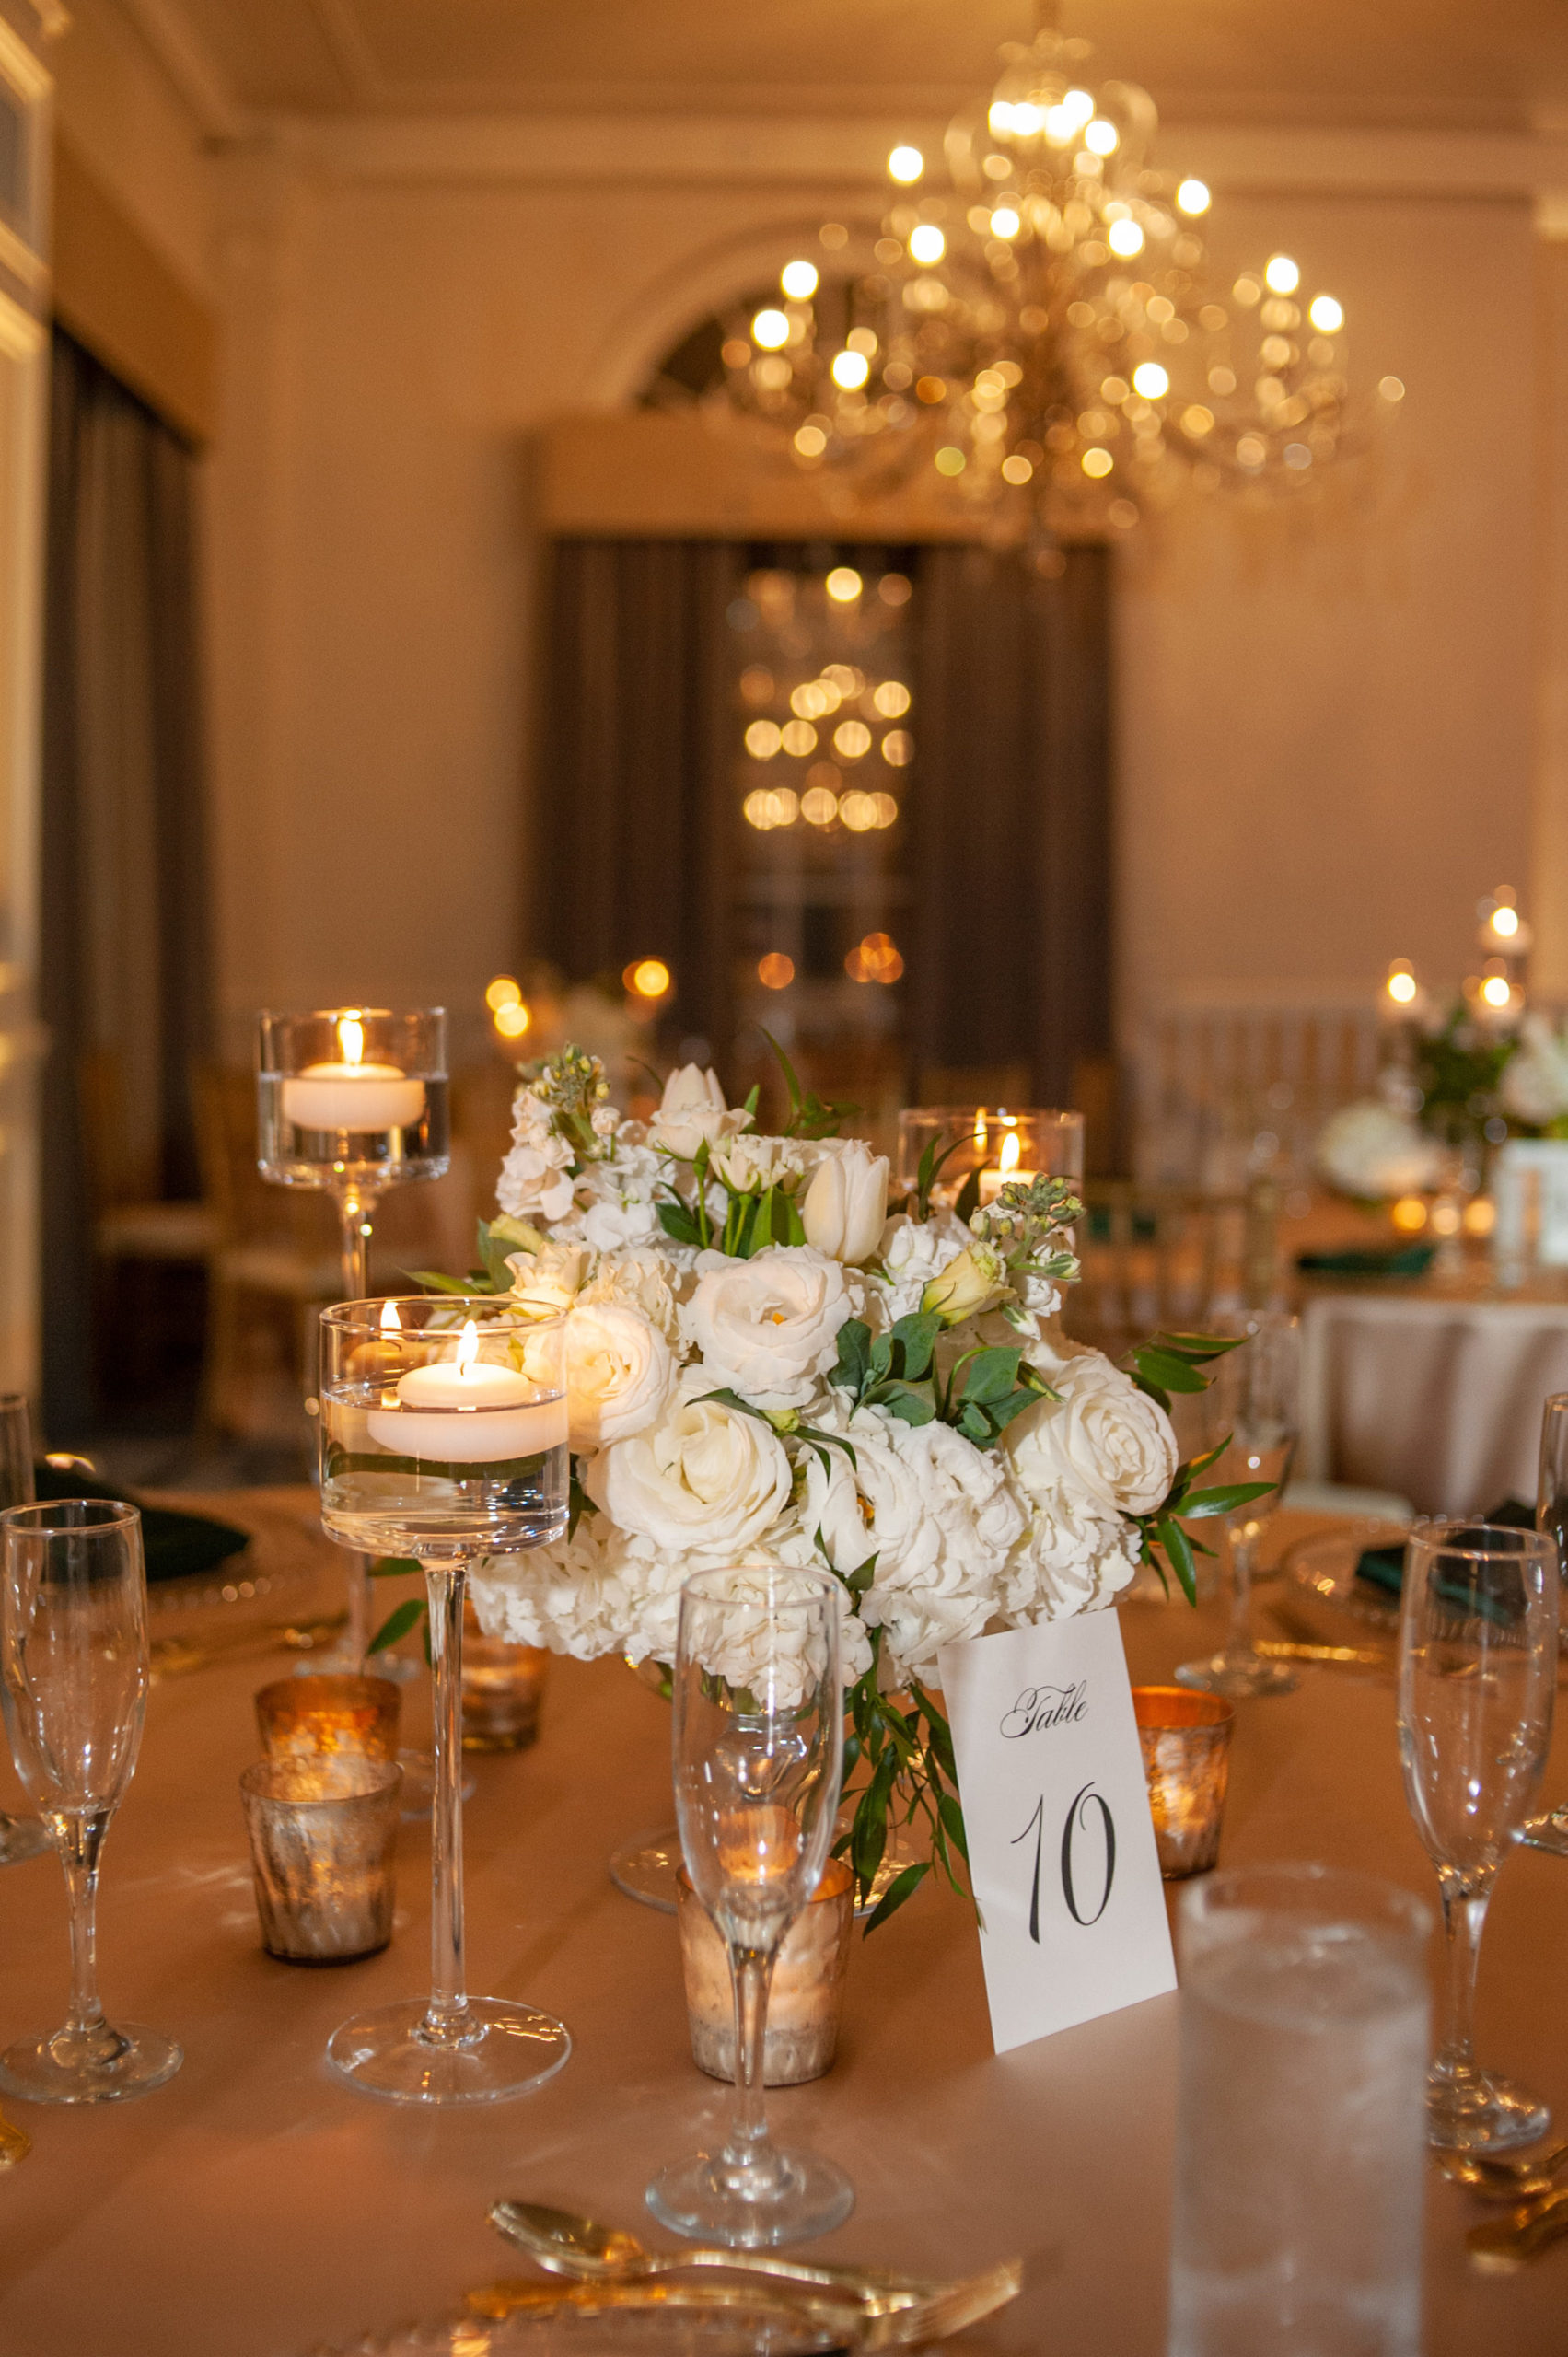 Classic Wedding Reception Decor, White Roses and Hydrangeas Low Floral Centerpiece, High Low Floating Candles | Tampa Bay Wedding Planner UNIQUE Weddings + Events